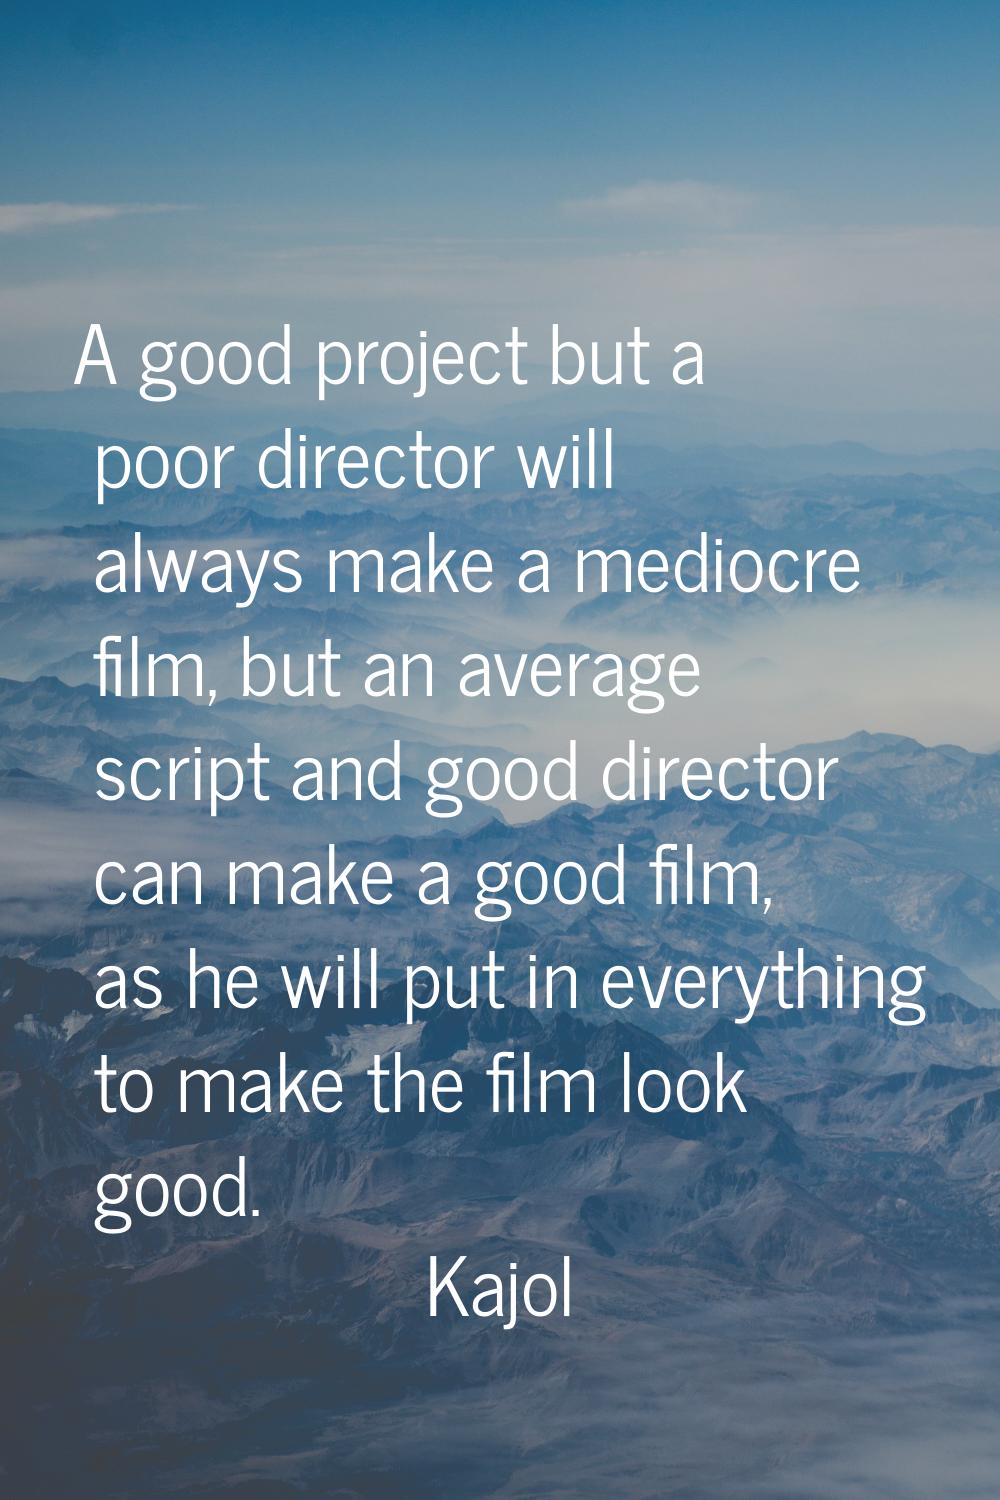 A good project but a poor director will always make a mediocre film, but an average script and good